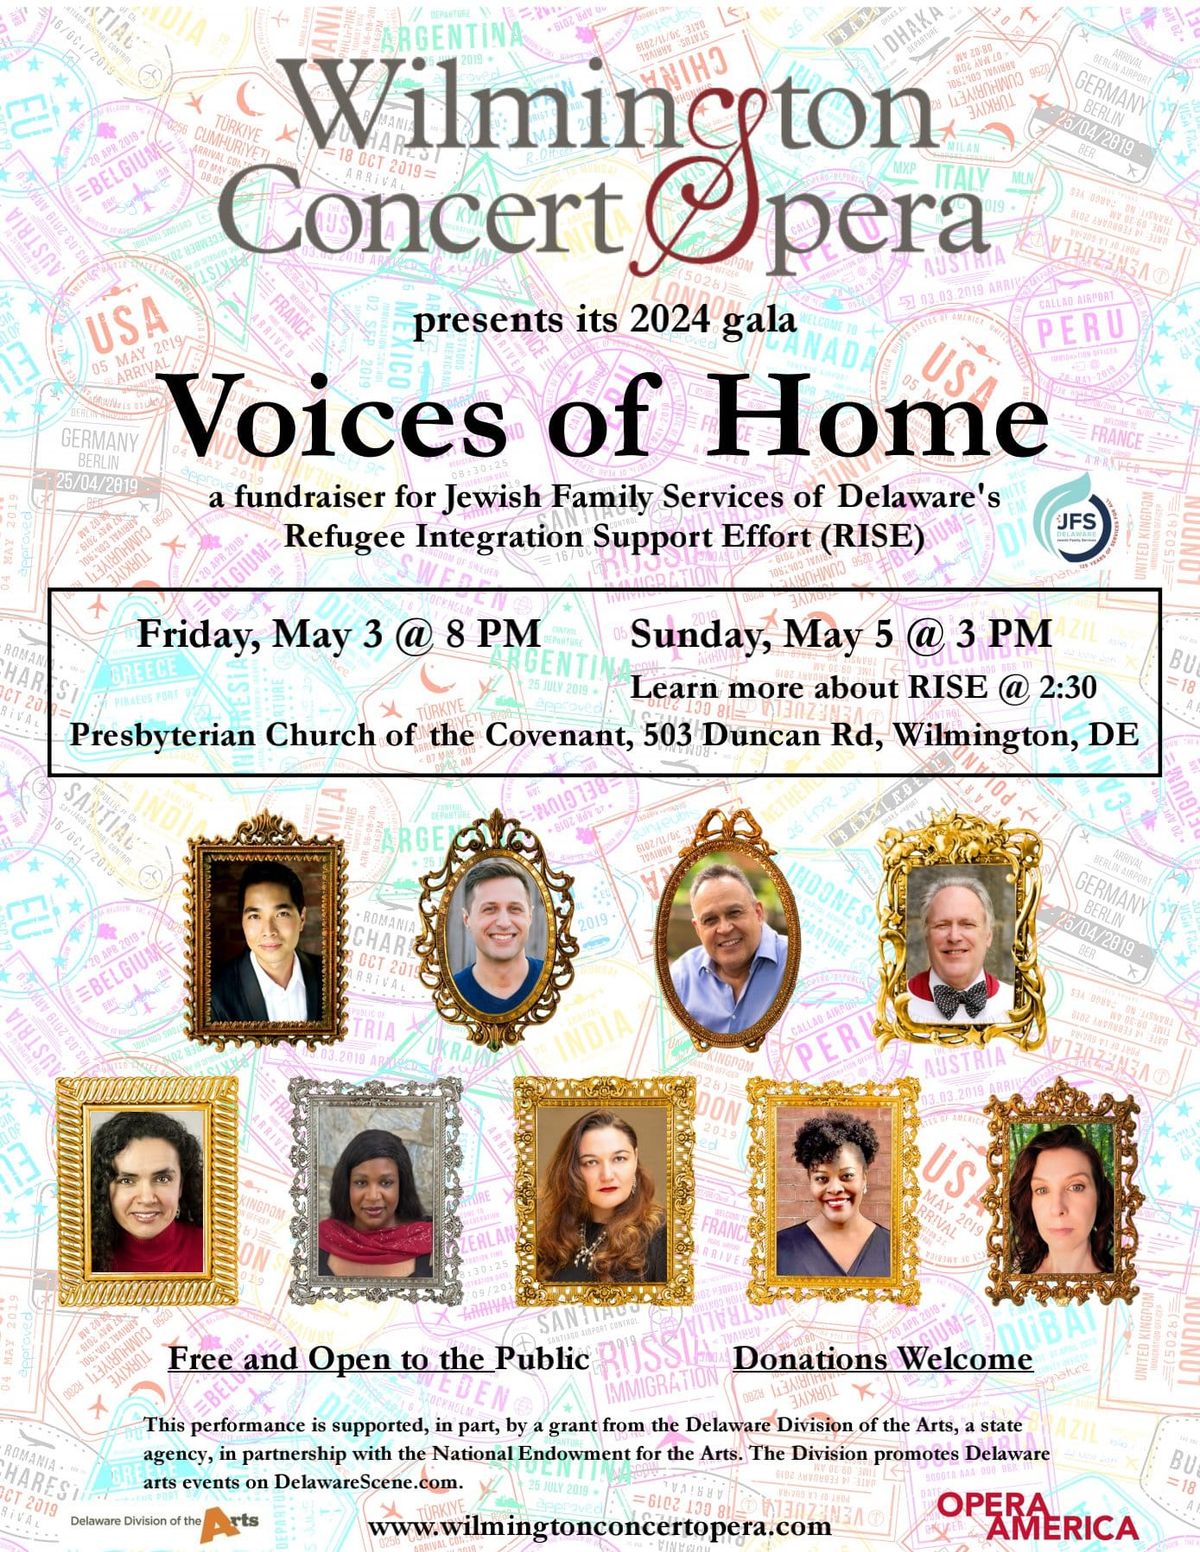 Voices of Home Gala presented by Wilmington Concert Opera 